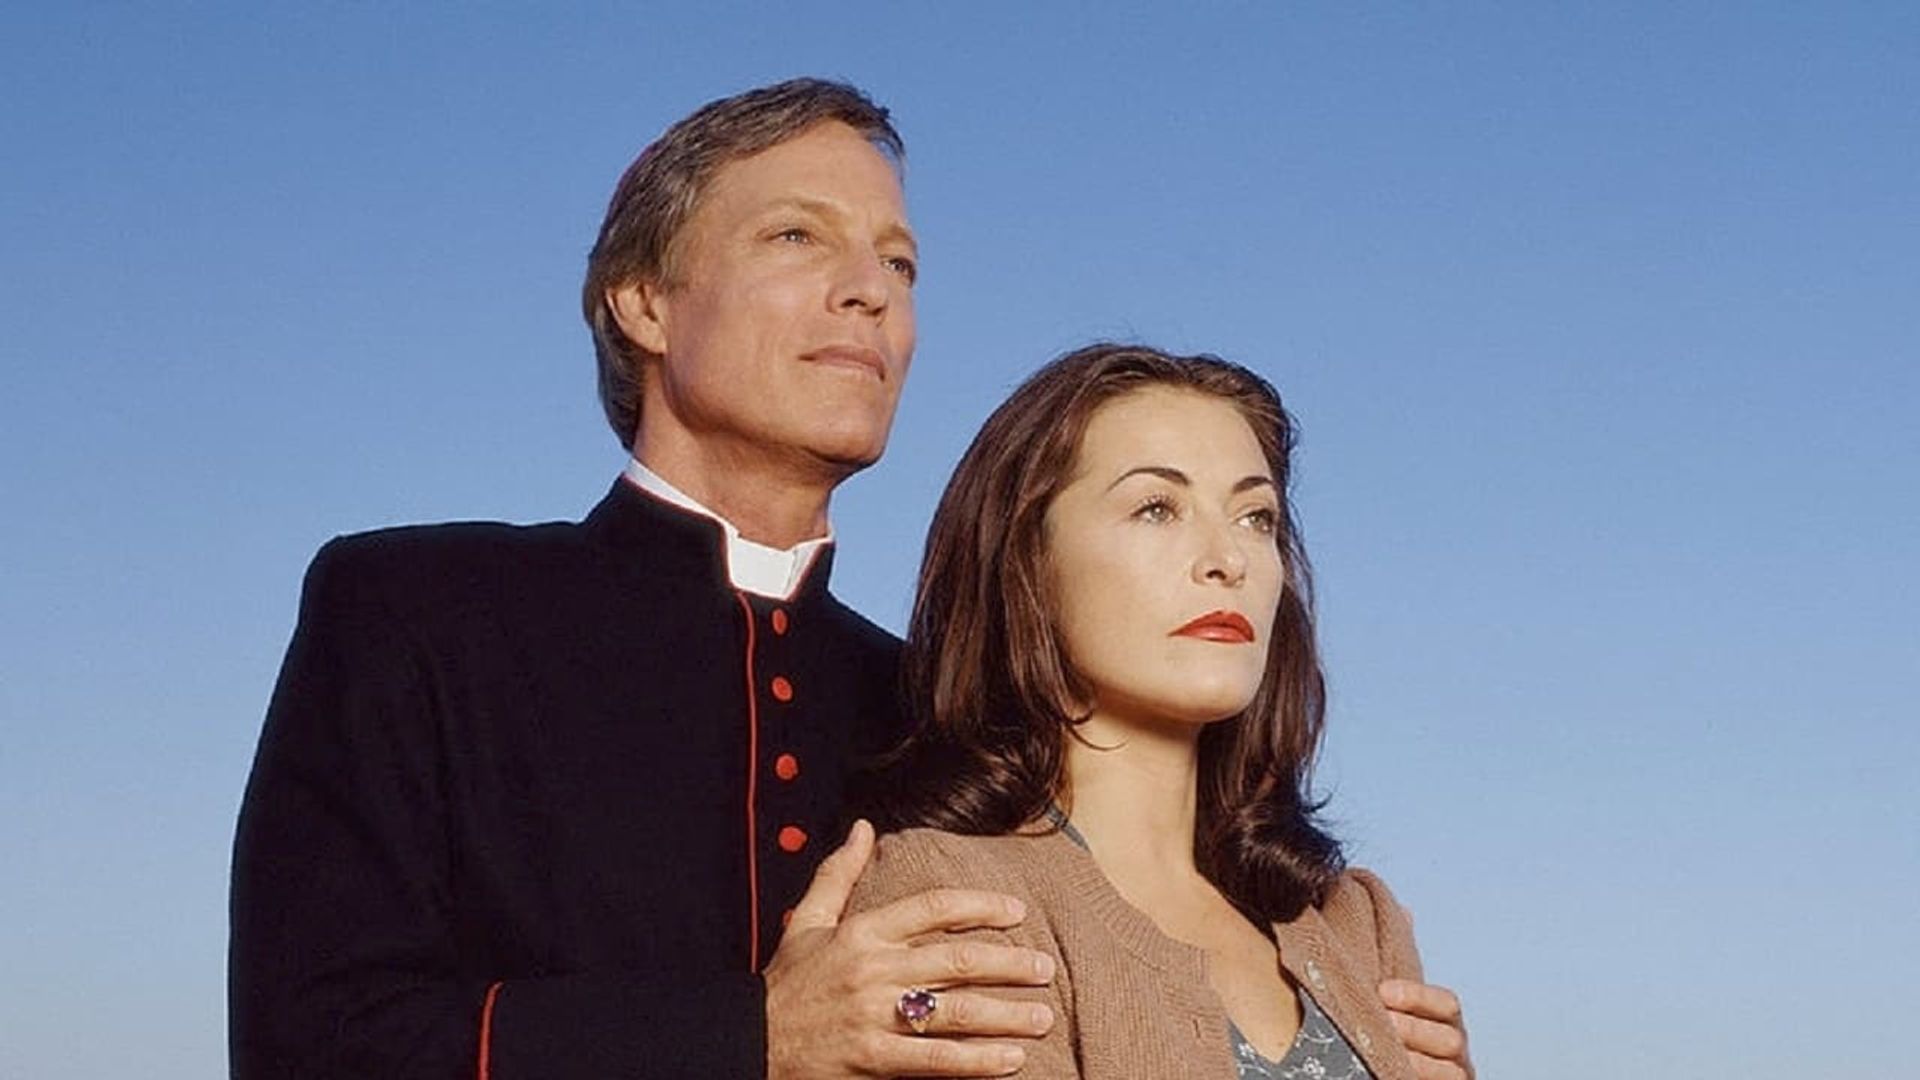 The Thorn Birds: The Missing Years background